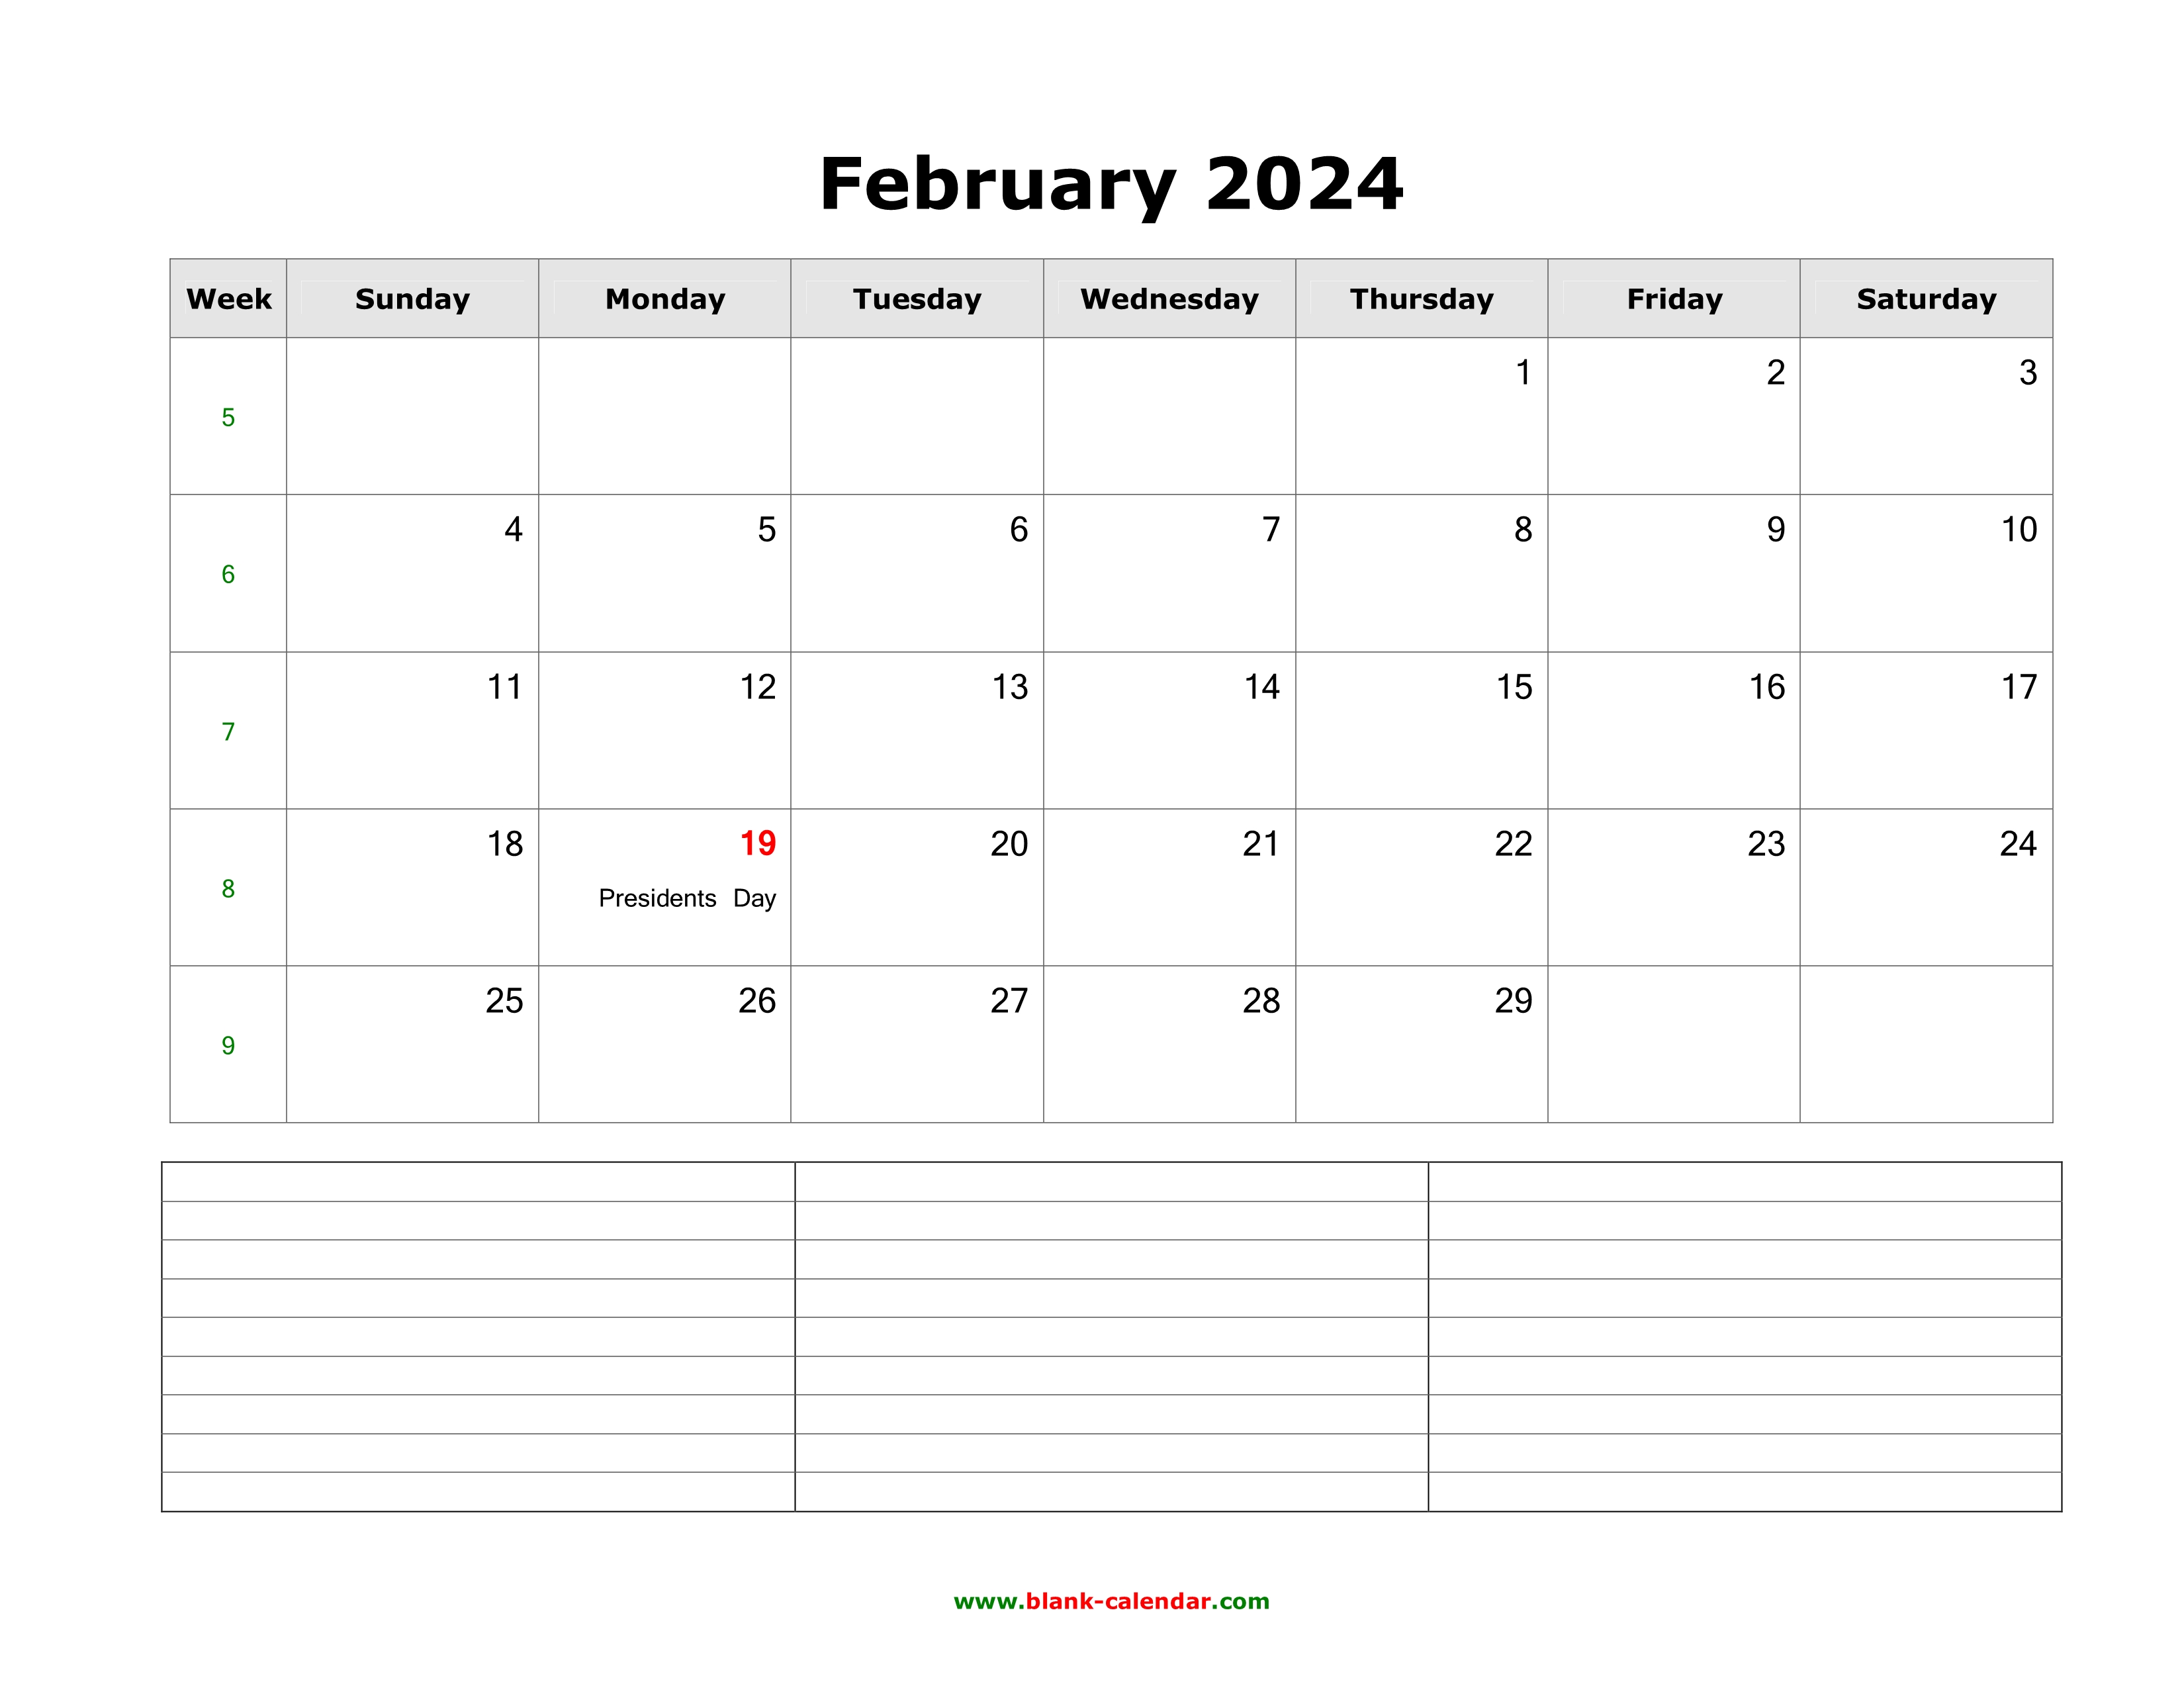 Download February 2024 Blank Calendar with Space for Notes (horizontal)